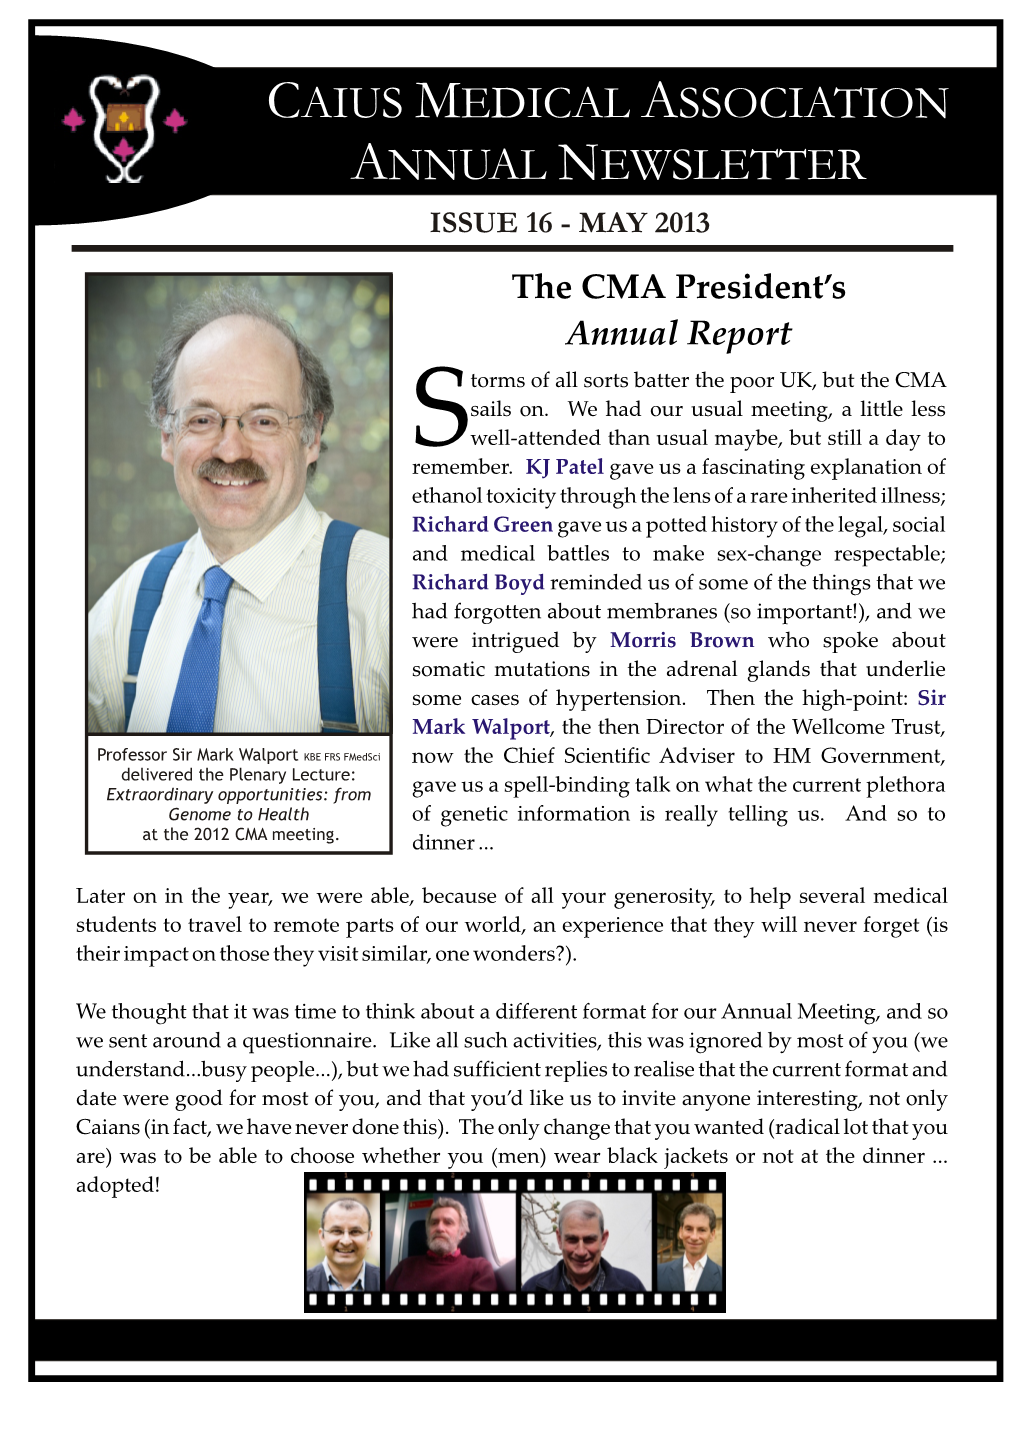 CAIUS MEDICAL ASSOCIATION ANNUAL NEWSLETTER ISSUE 16 - MAY 2013 the CMA President’S Annual Report Torms of All Sorts Batter the Poor UK, but the CMA Sails On